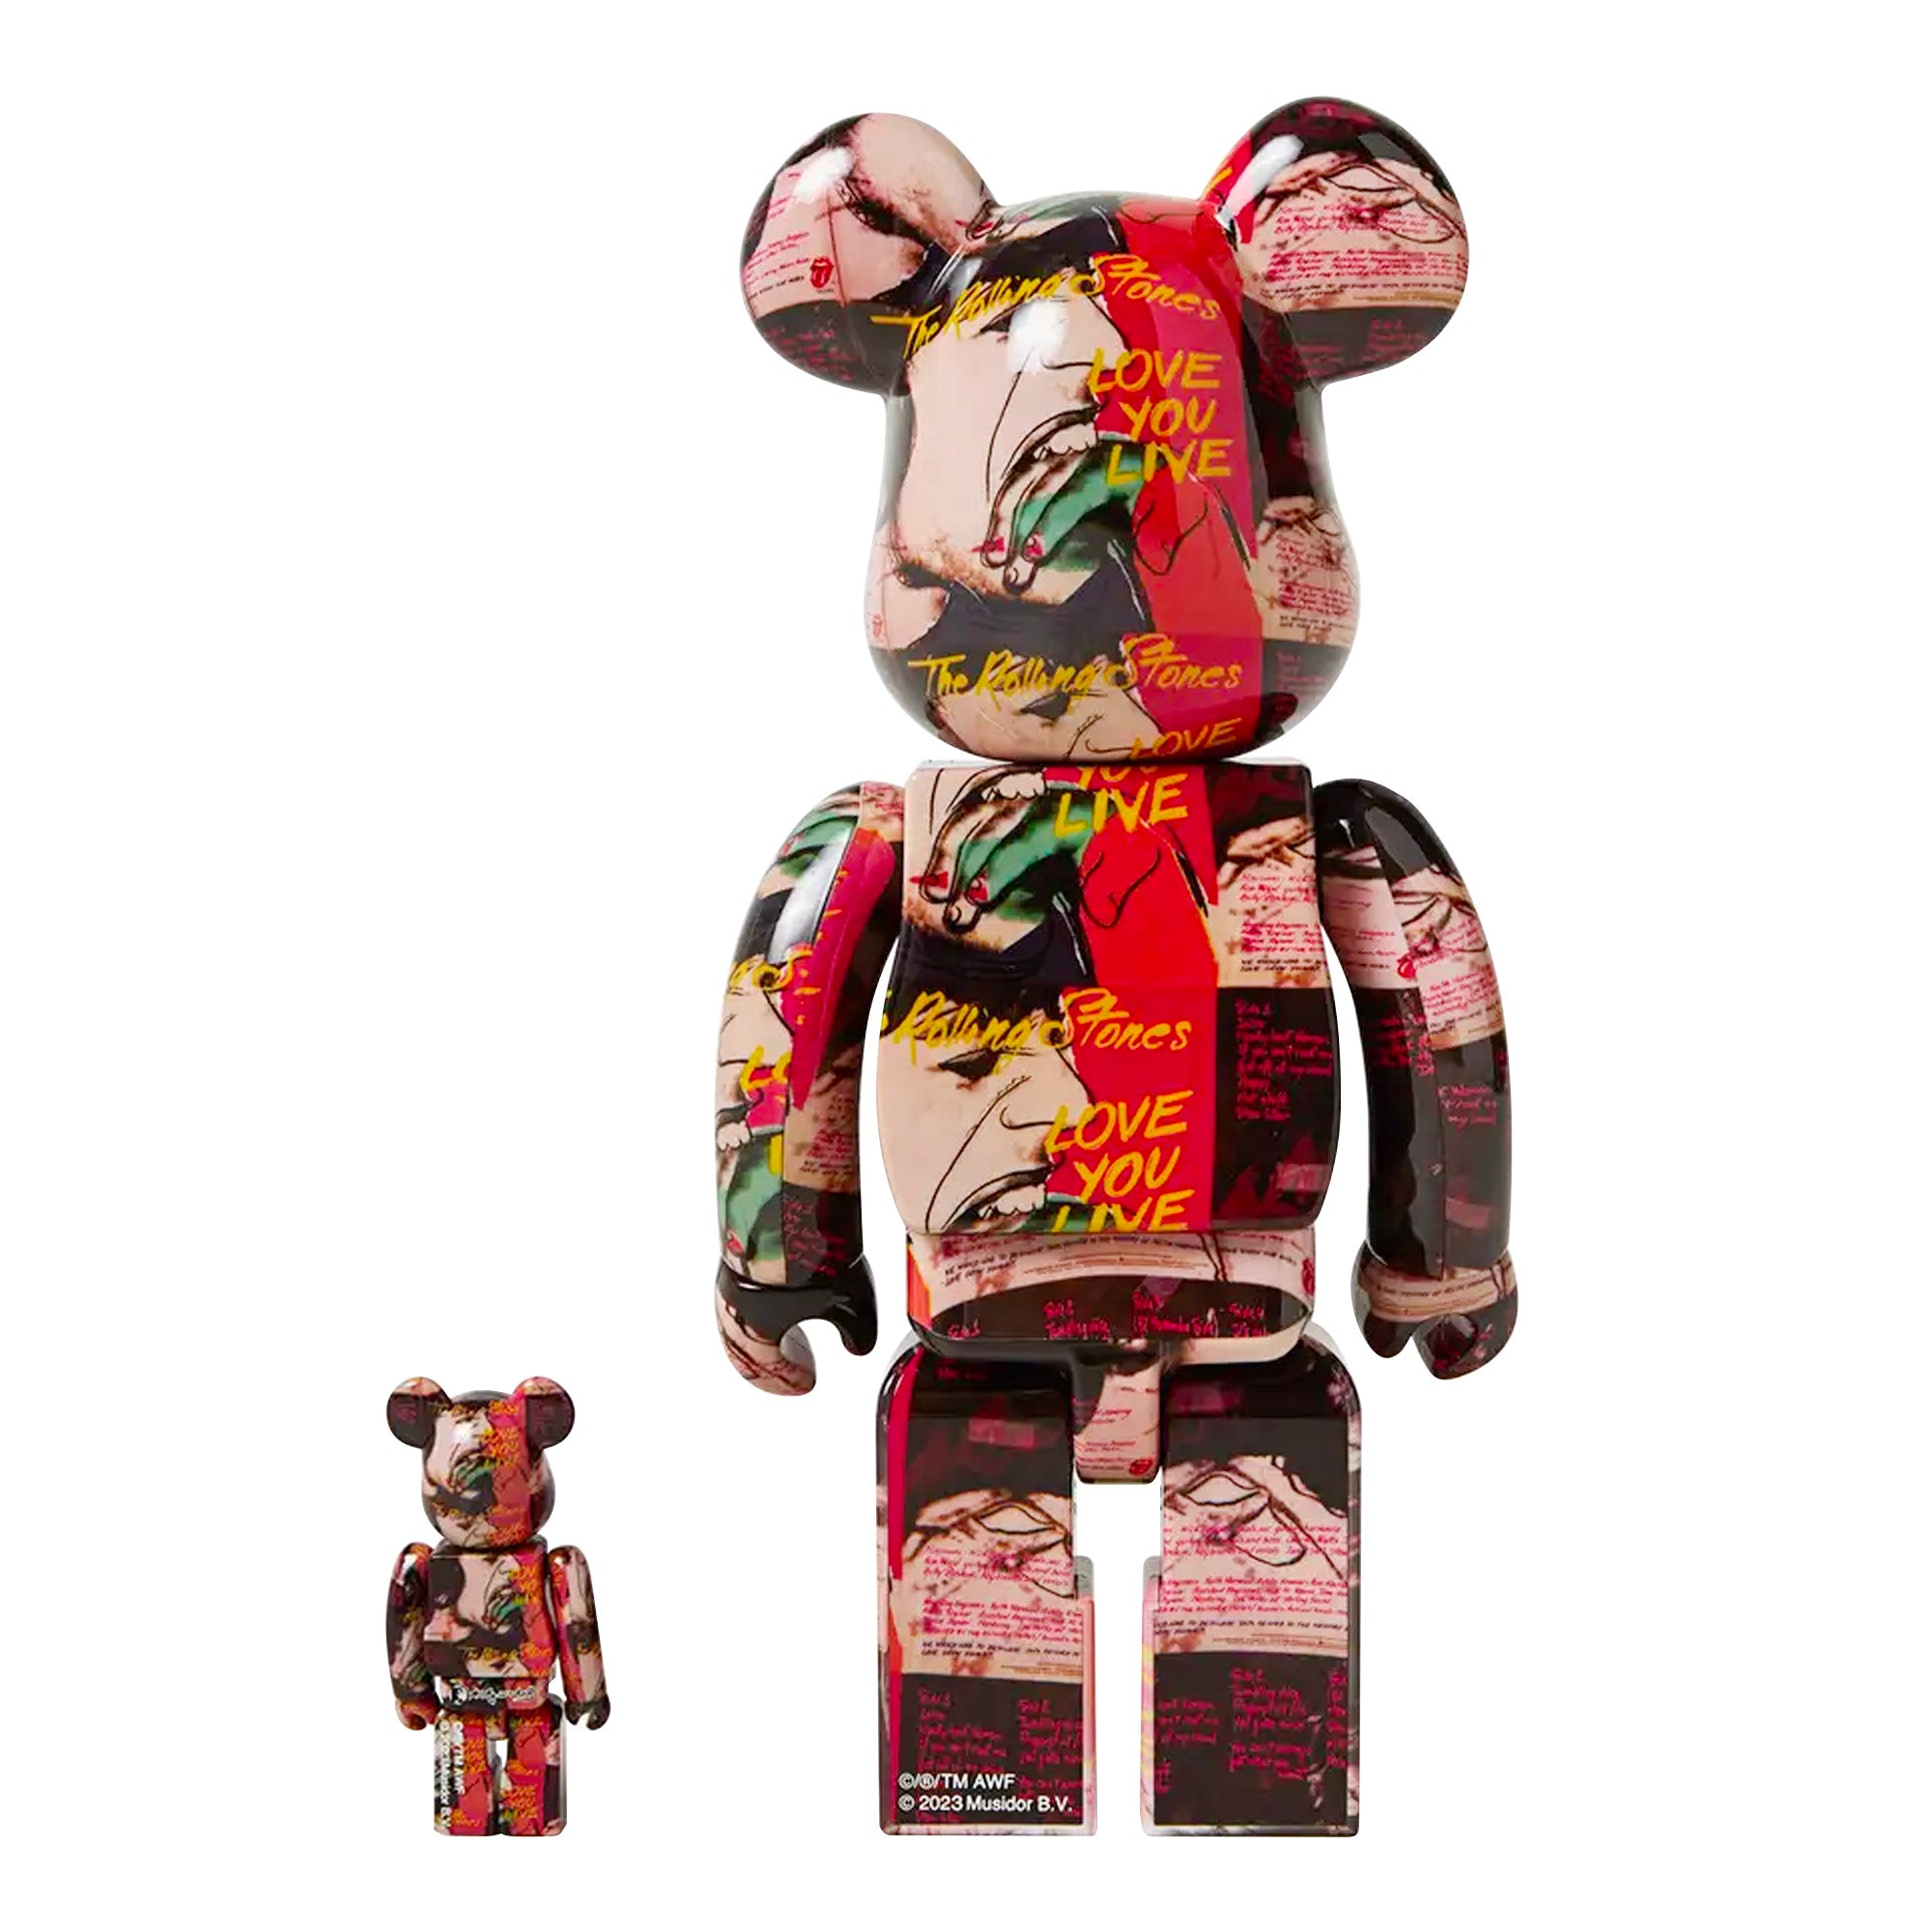 MEDICOM TOY: BE@RBRICK - Andy Warhol x The Rolling Stones 